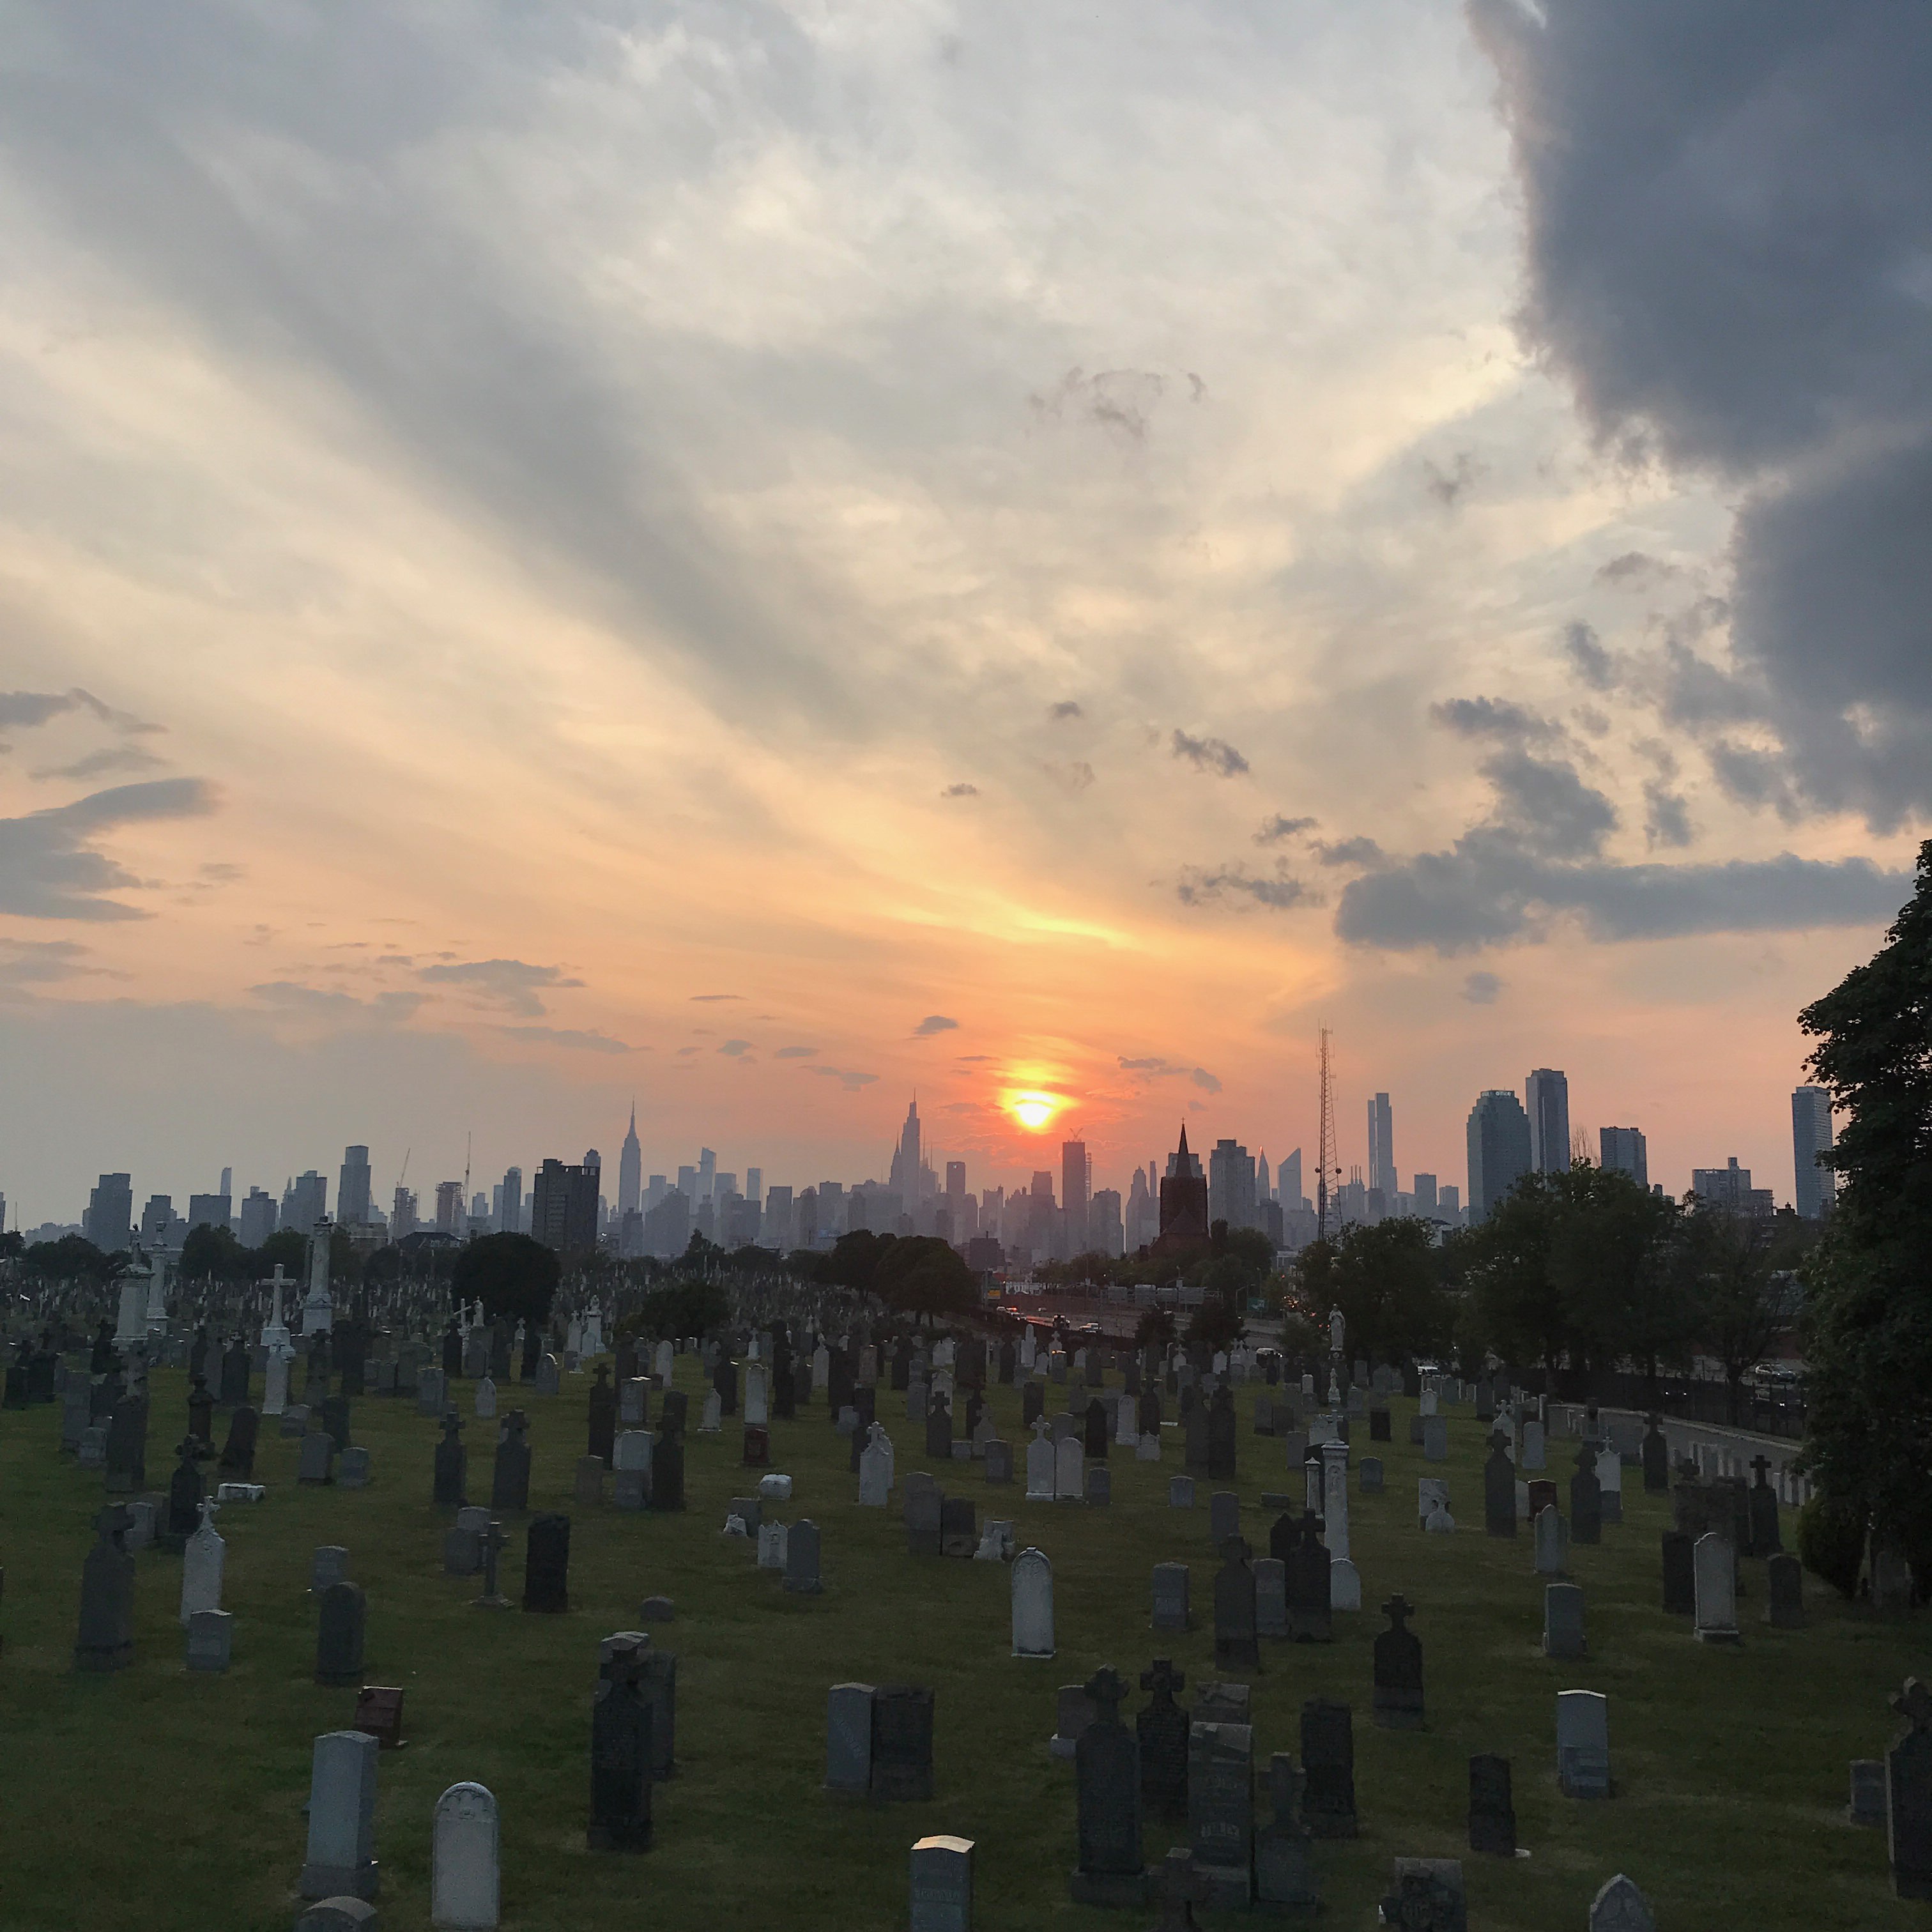 Sunset view of Manhattan from behind the Calvary Cemetery